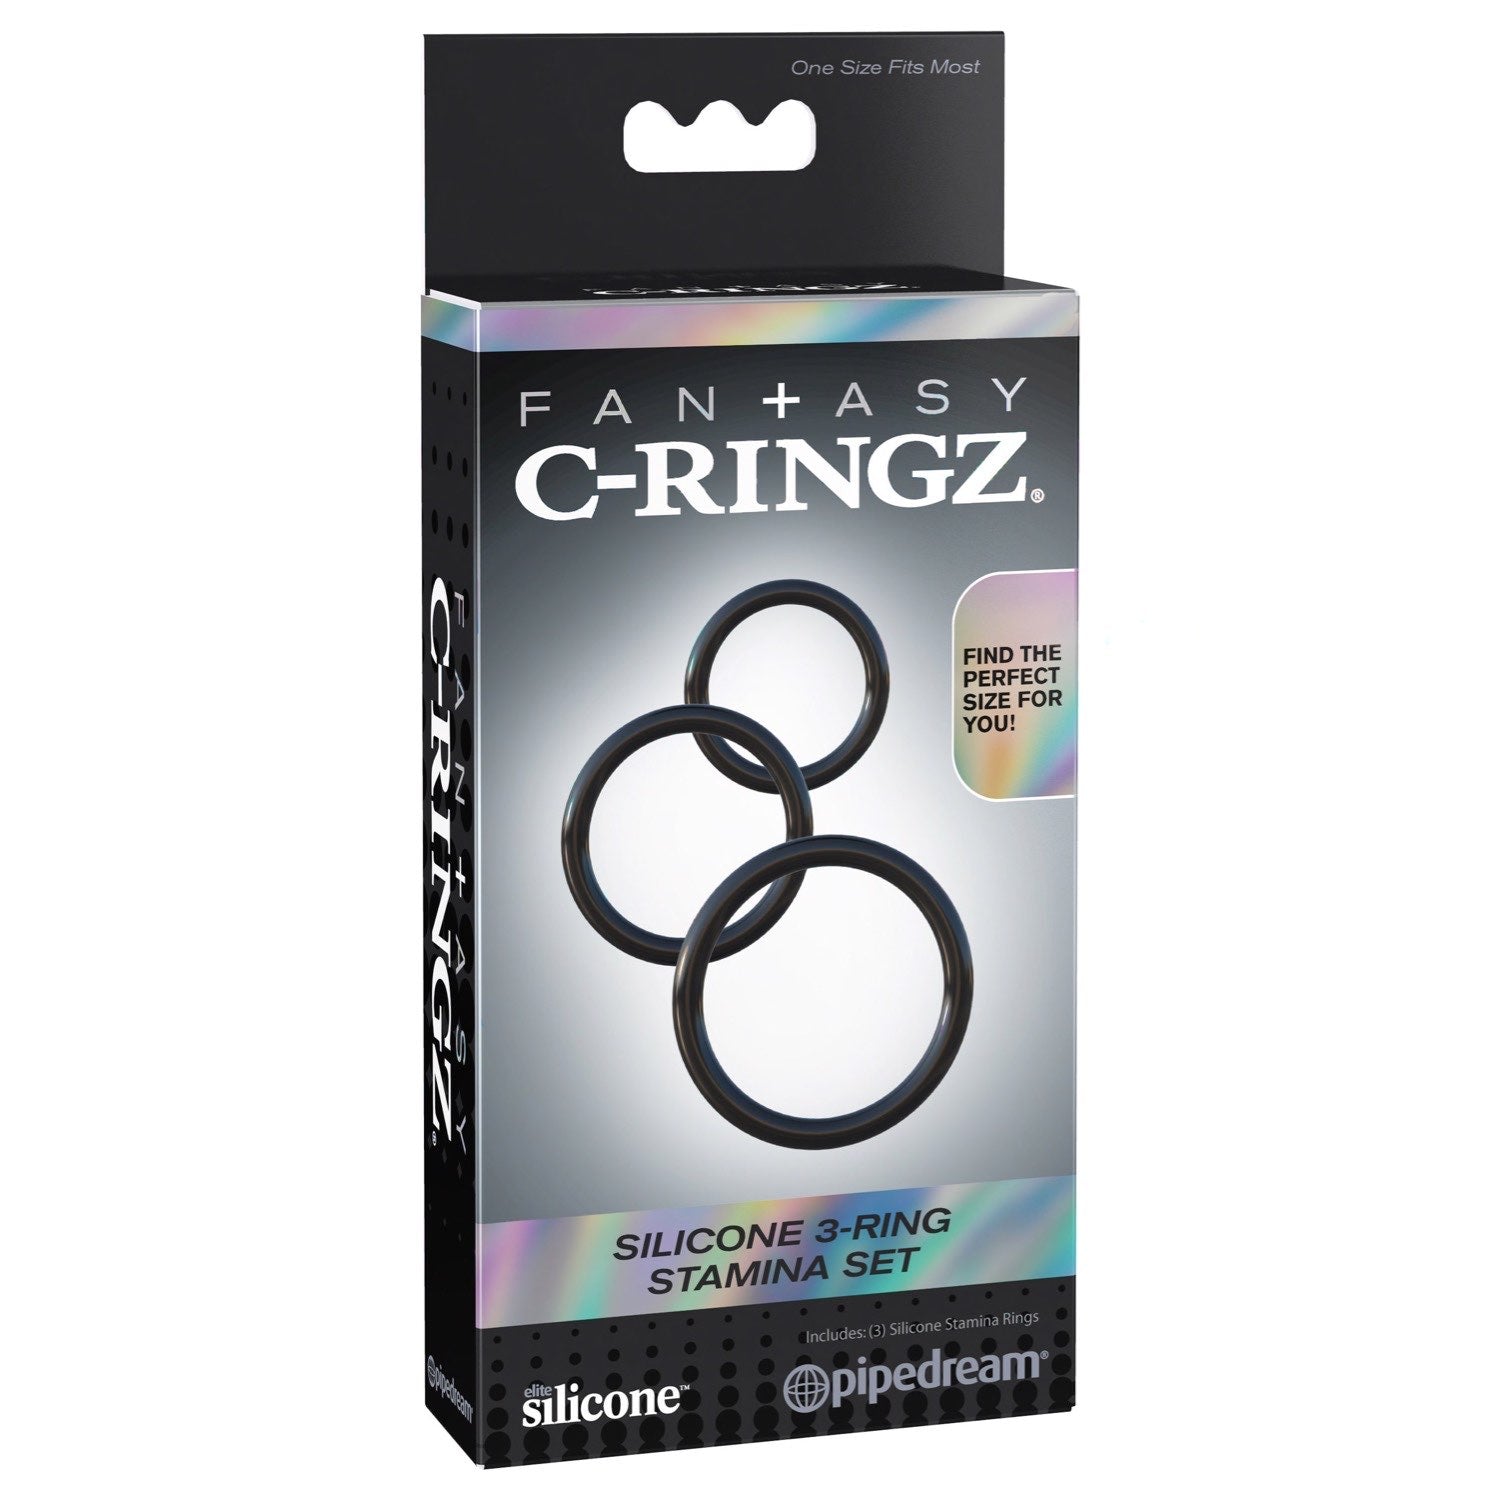 Fantasy C-Ringz Silicone 3-Ring Stamina Set - Black Cock Rings - Set of 3 by Pipedream